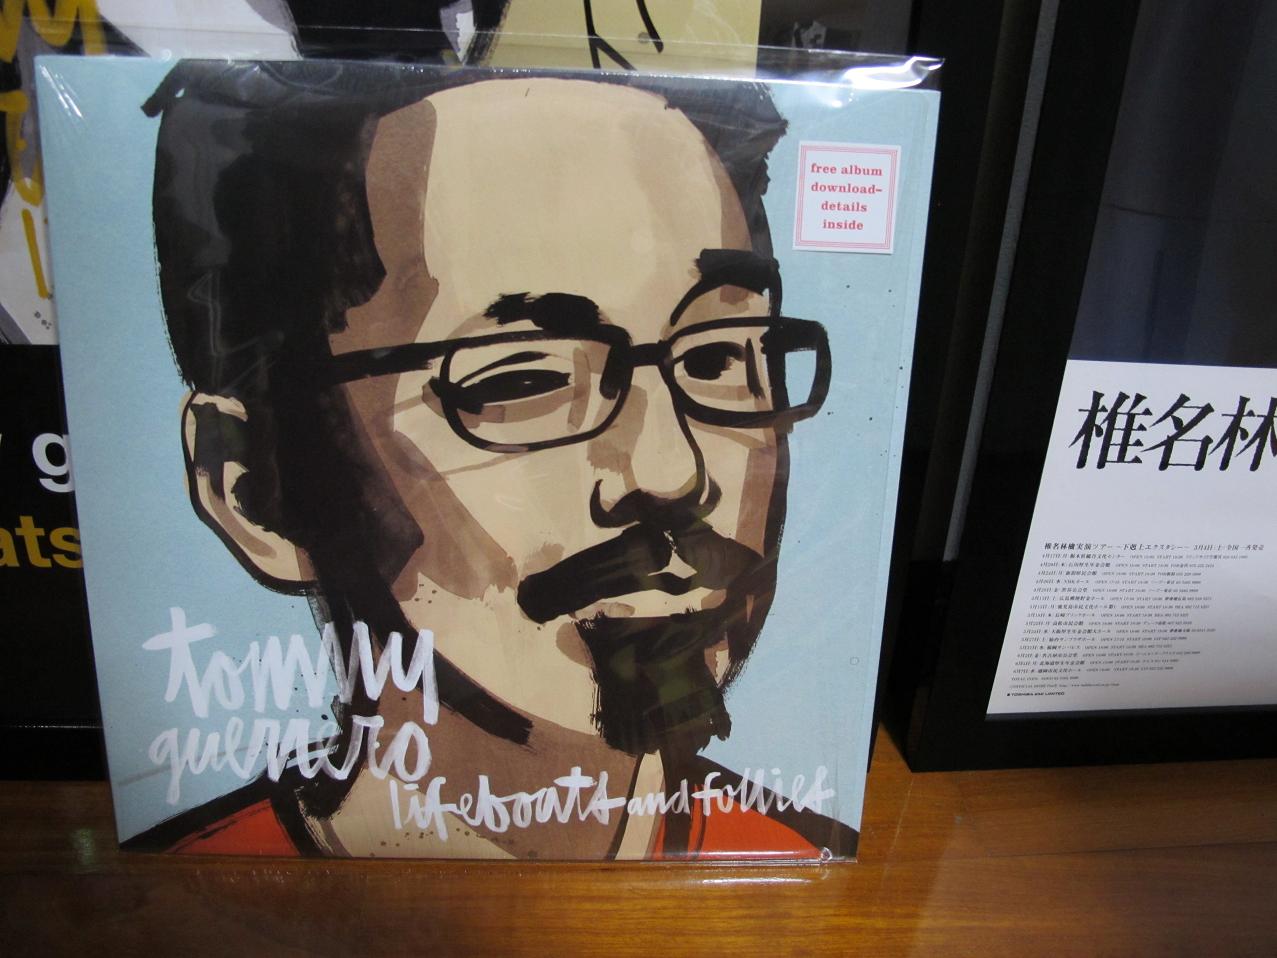 Tommy Guerrero 「Lifeboats and follies」 LP : ◇◇◇◇◇◇◇◇◇◇